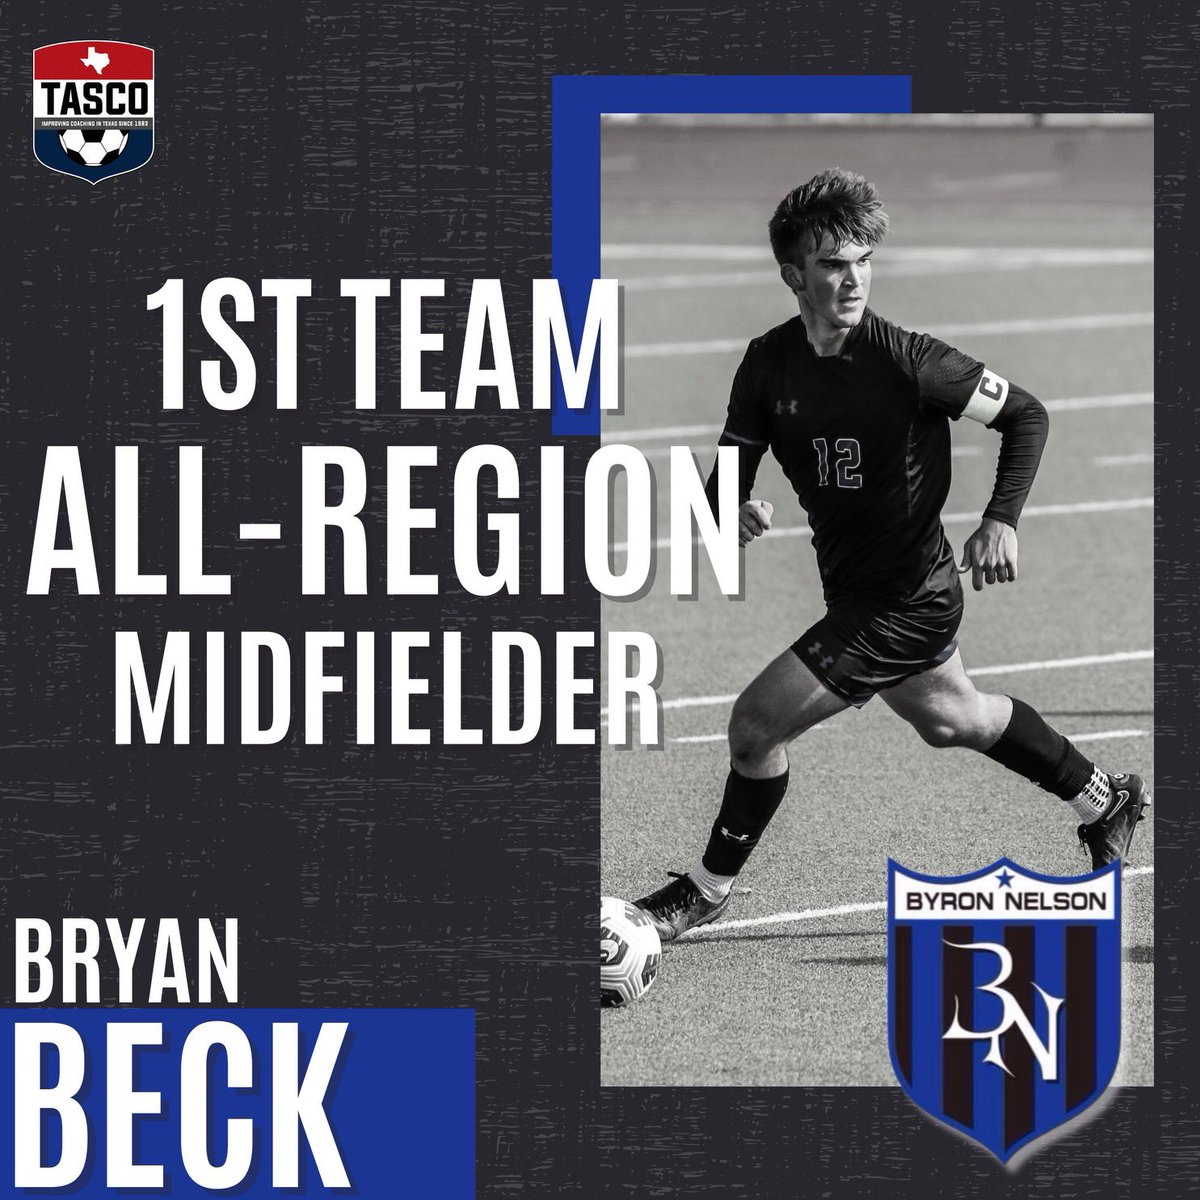 Another accolade for our graduating senior, @BryanBeck_2005 Well done! @tascosoccer